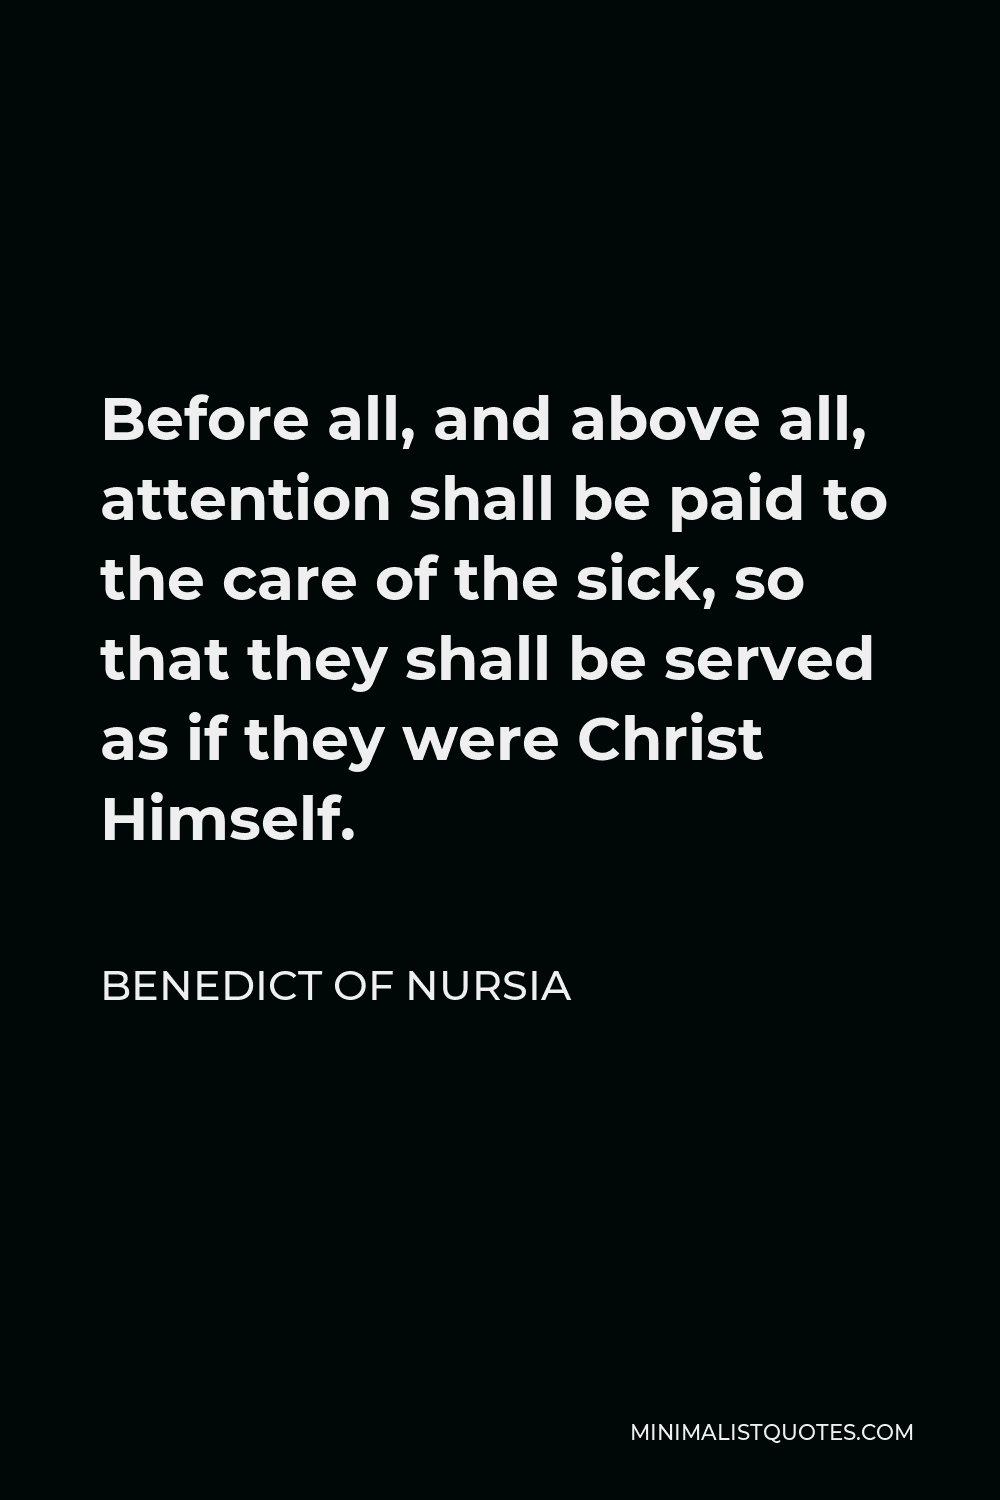 Benedict of Nursia Quote - Before all, and above all, attention shall be paid to the care of the sick, so that they shall be served as if they were Christ Himself.